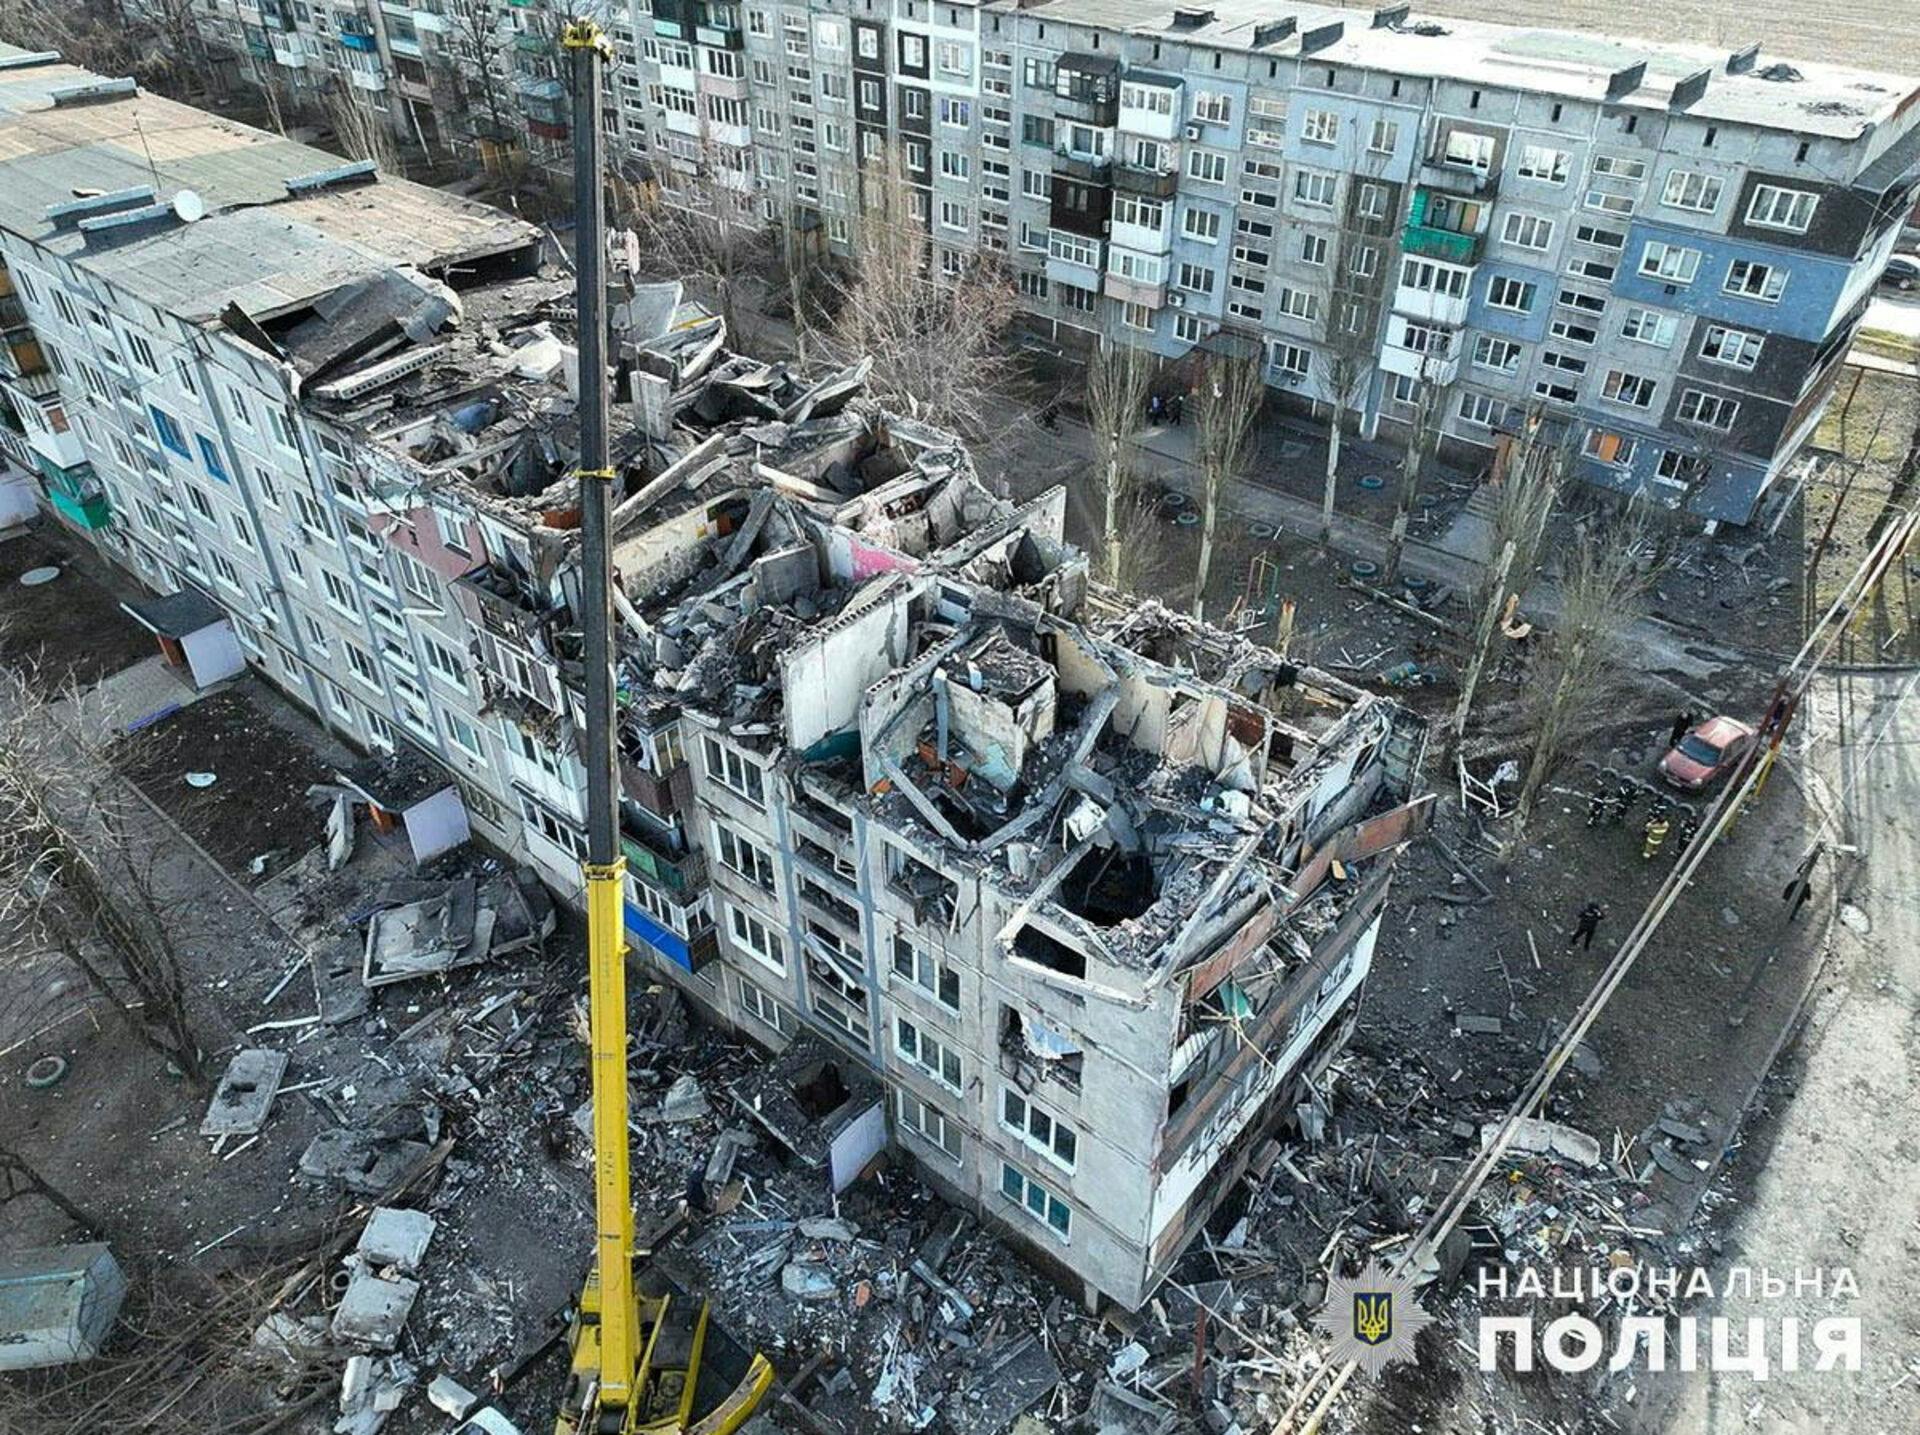 A drone view shows an apartment building 